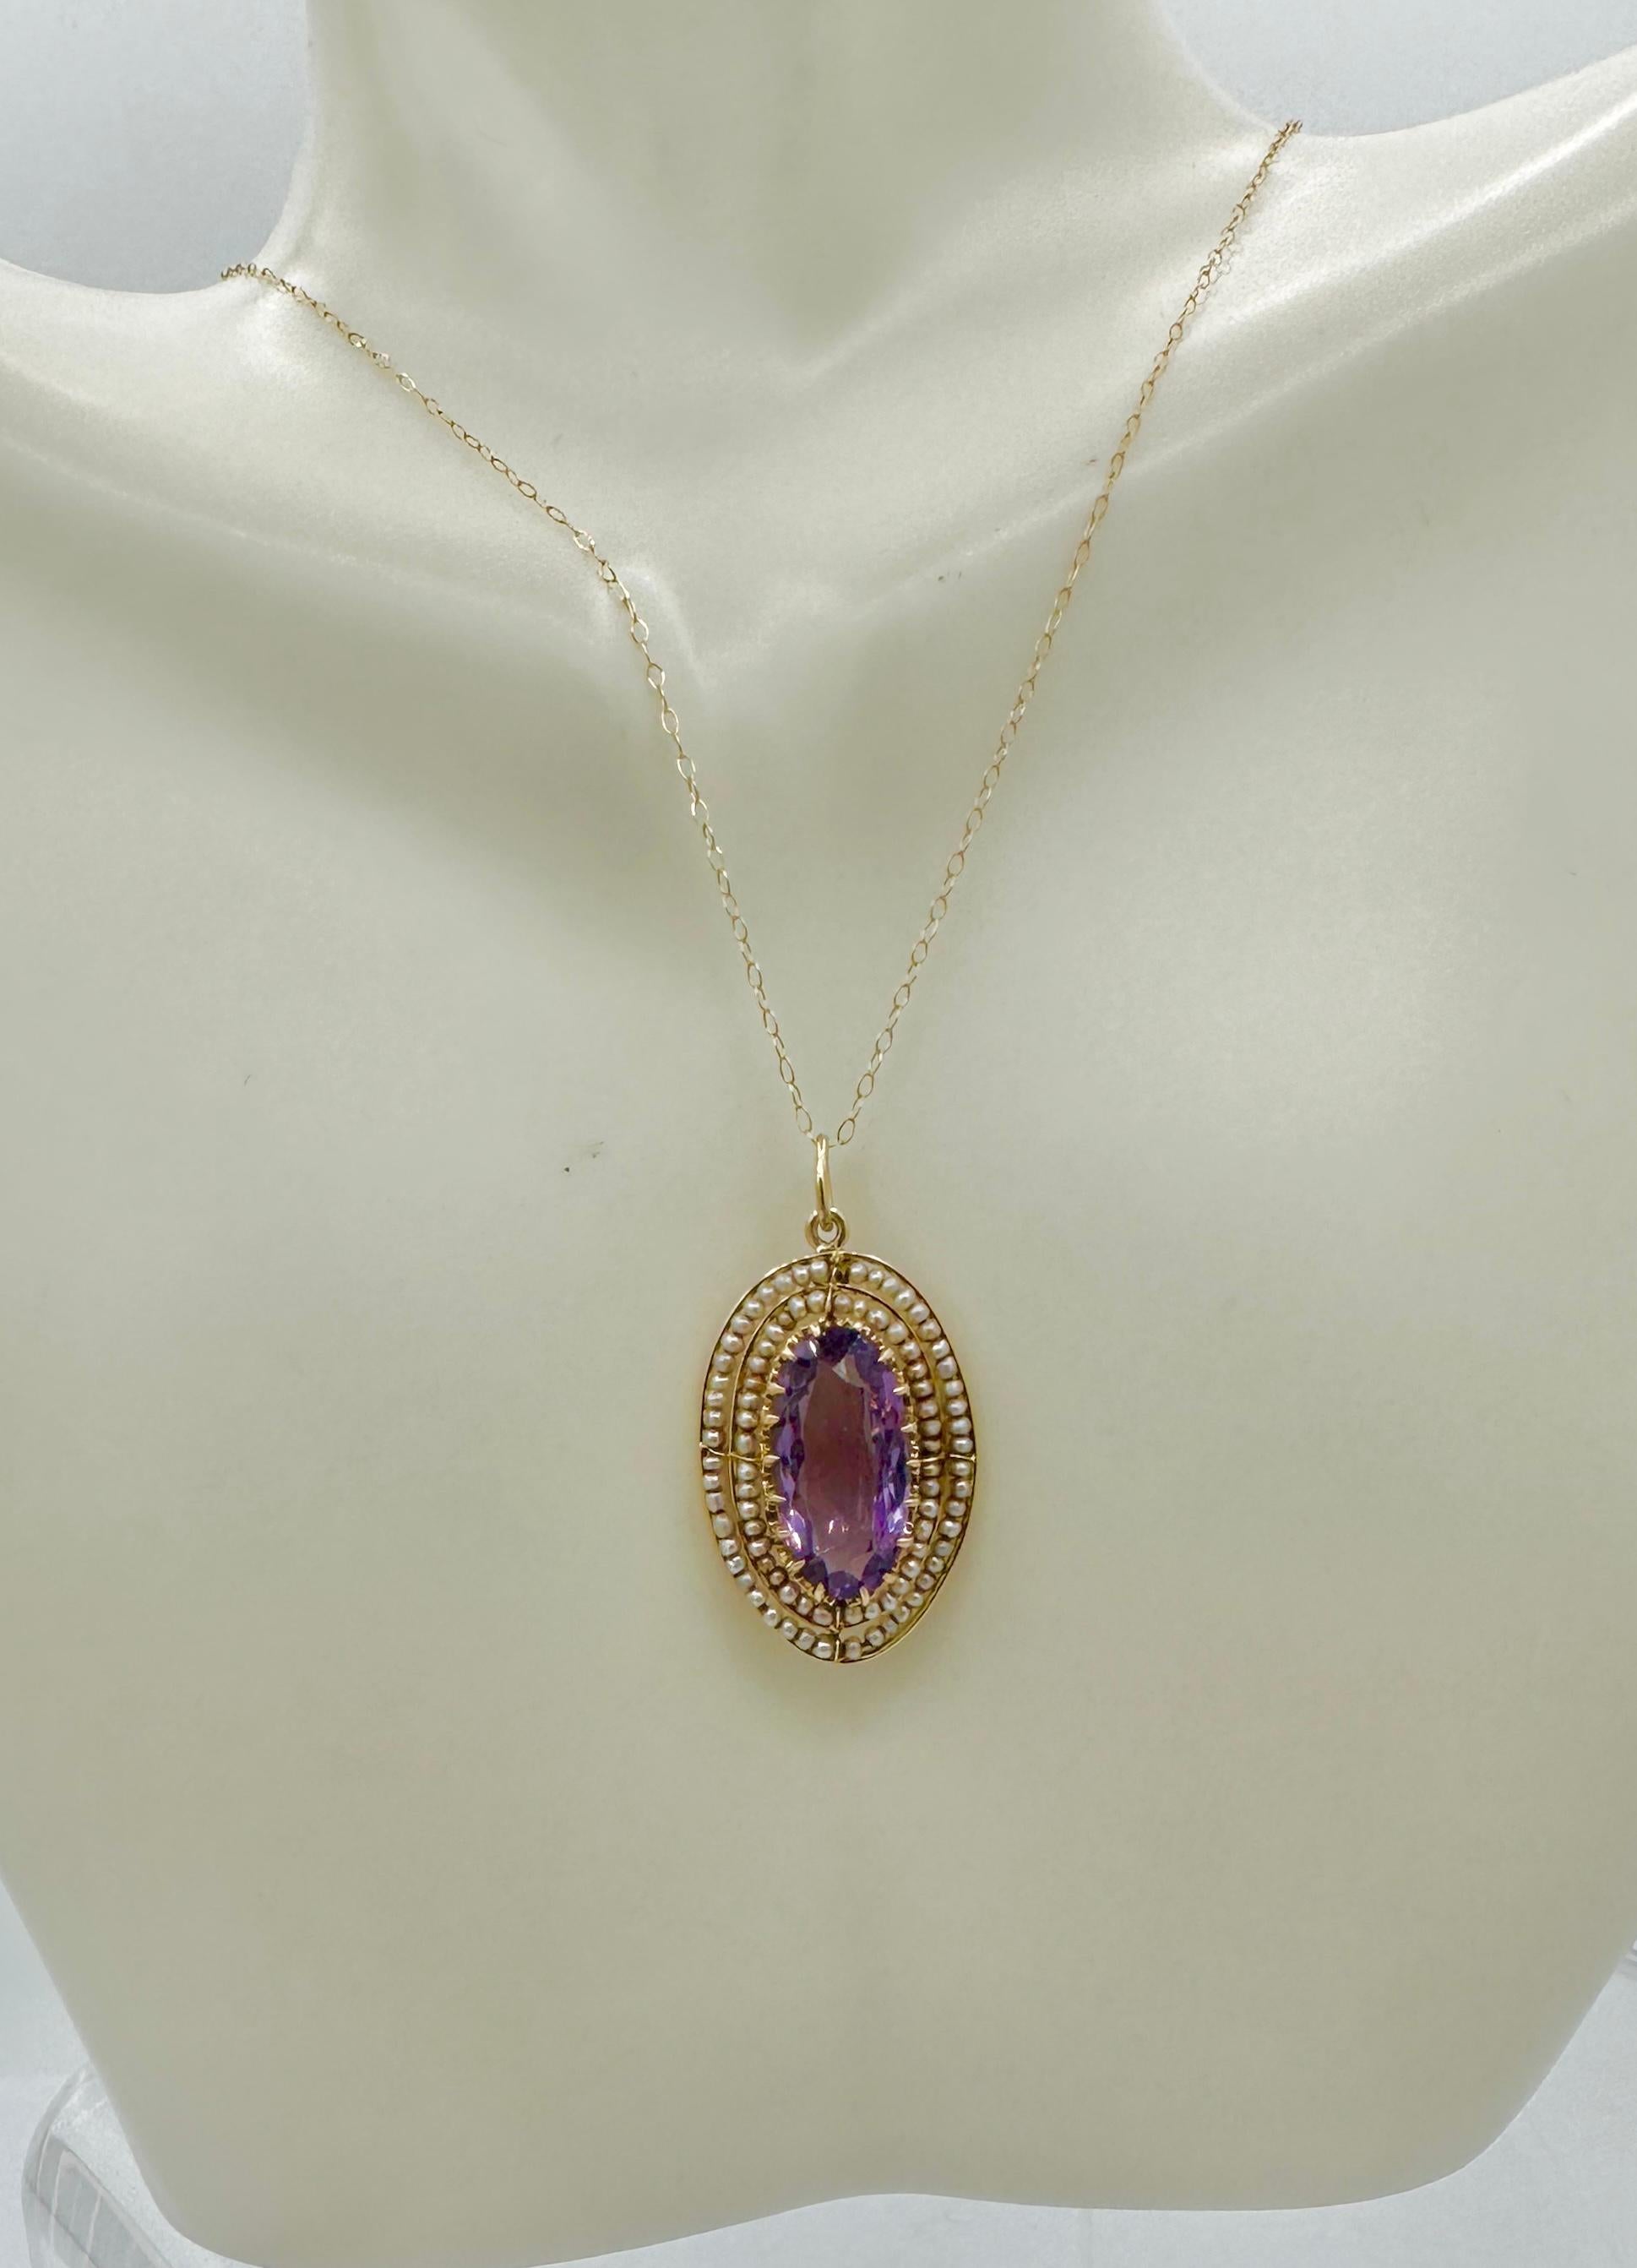 THIS IS A STUNNING VICTORIAN EDWARDIAN 2.5 CARAT OVAL FACETED AMETHYST AND PEARL LAVALIERE PENDANT WITH THE MOST GORGEOUS NATURAL OVAL FACETED AMETHYST GEM SURROUNDED BY TWO LAYERS OF SEED PEARLS SET IN AN OPEN SETTING IN 14 KARAT YELLOW GOLD.  THIS